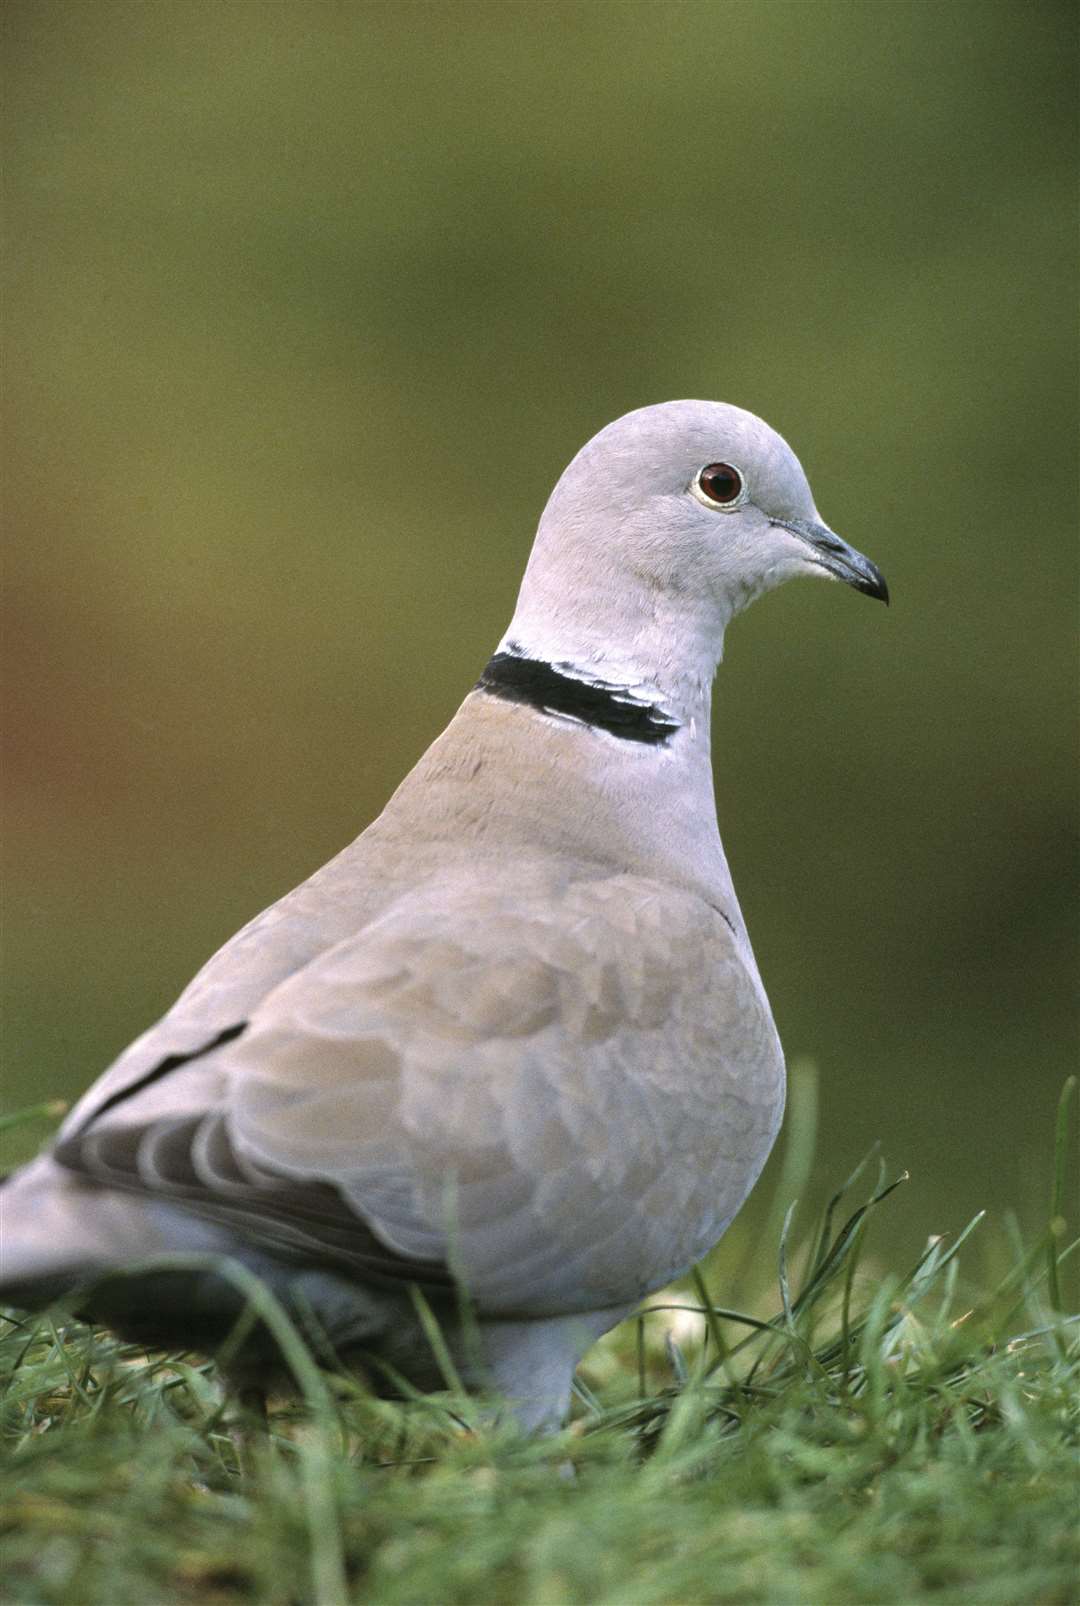 Collared dove Streptopelia decaocto, sitting in grass.